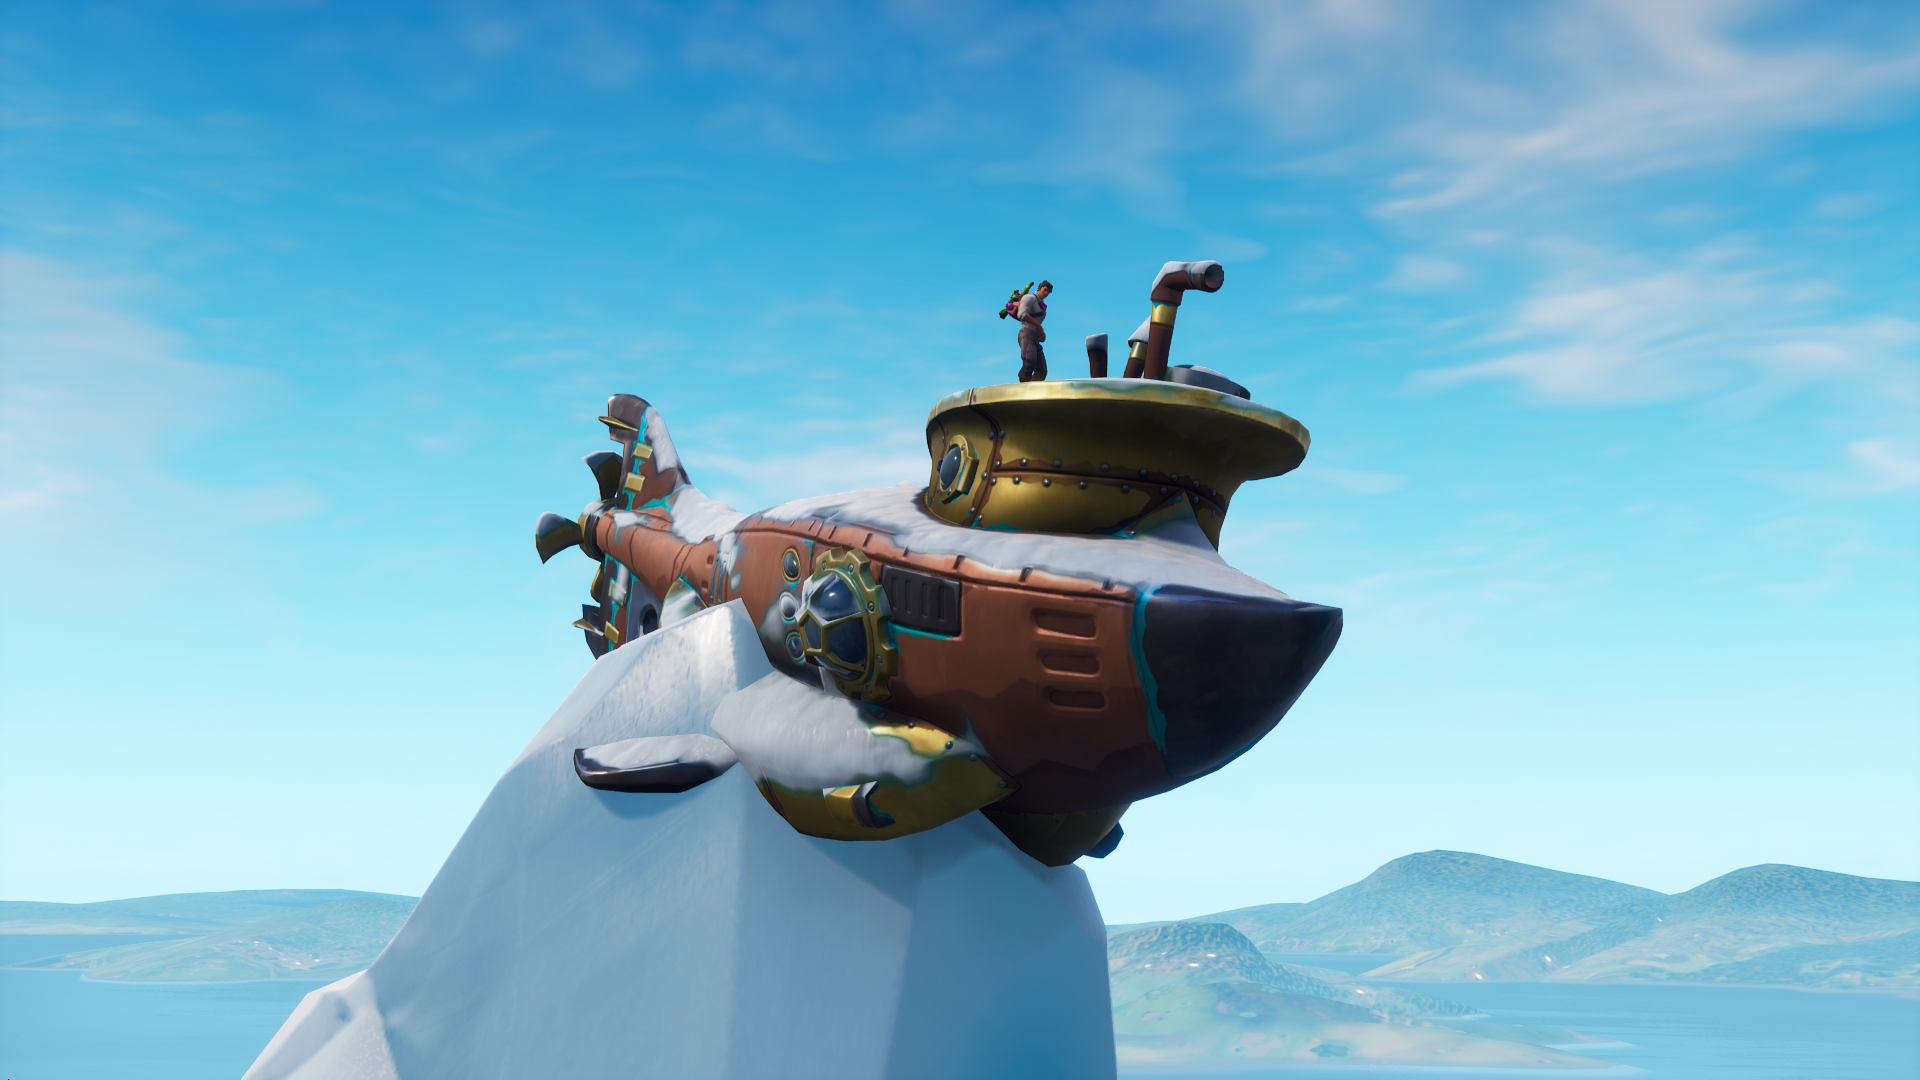 Fortnite submarine location: where to dance on top of a ... - 1920 x 1080 png 2717kB